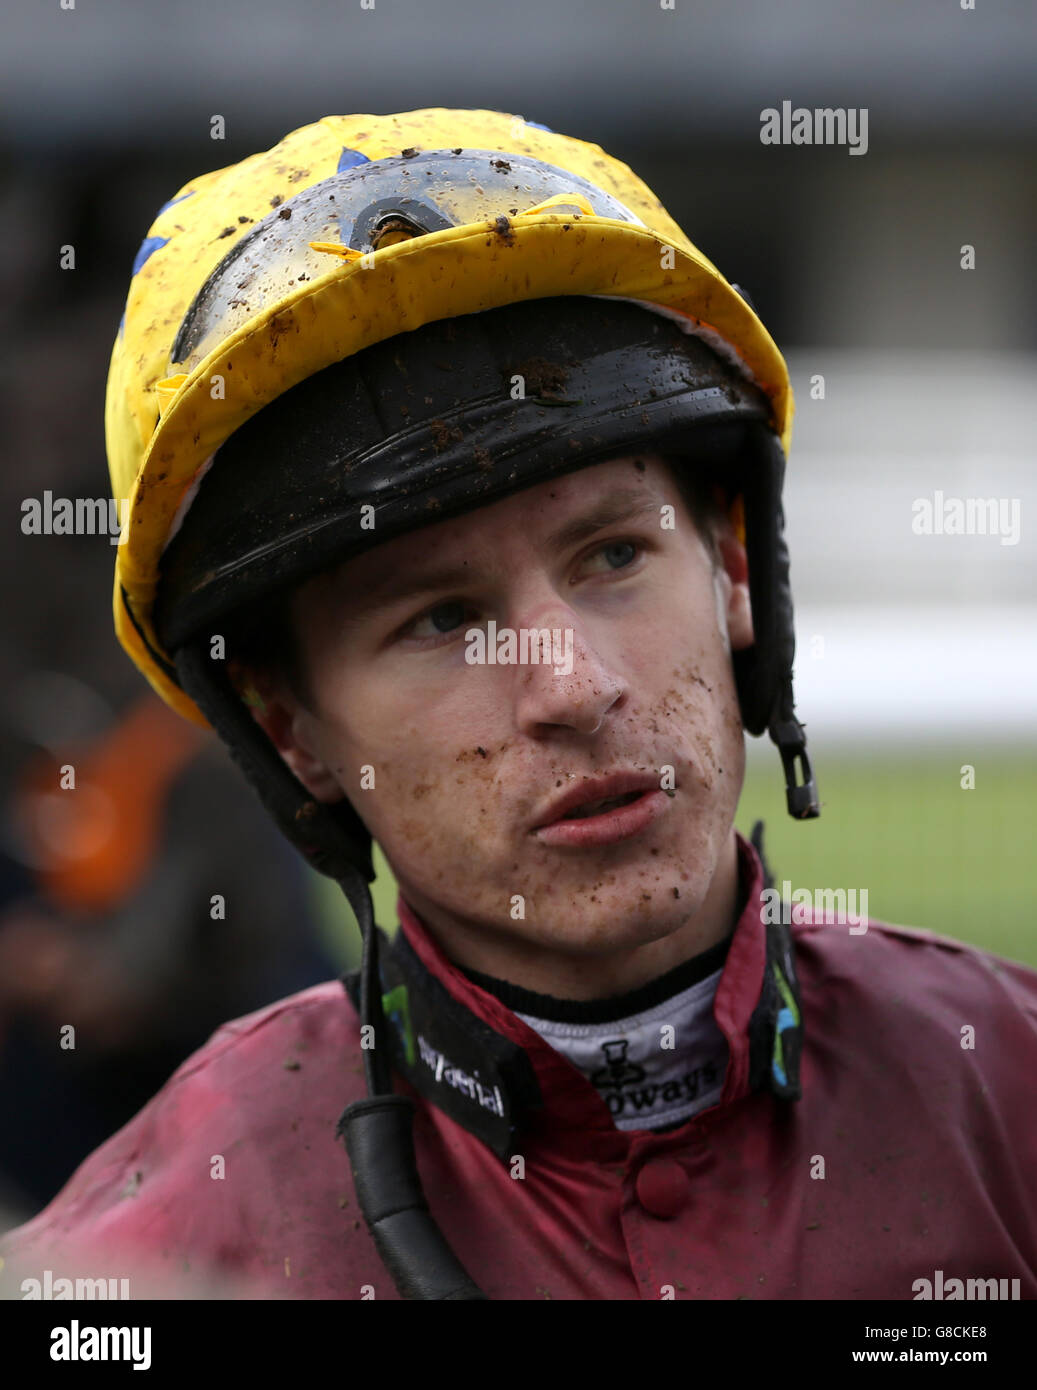 Jockey Richard Kingscote at Leicester Racecourse. PRESS ASSOCIATION Photo. Picture date: Tuesday October 6, 2015. See PA story RACING Leicester. Photo credit should read: Simon Cooper/PA Wire. Stock Photo